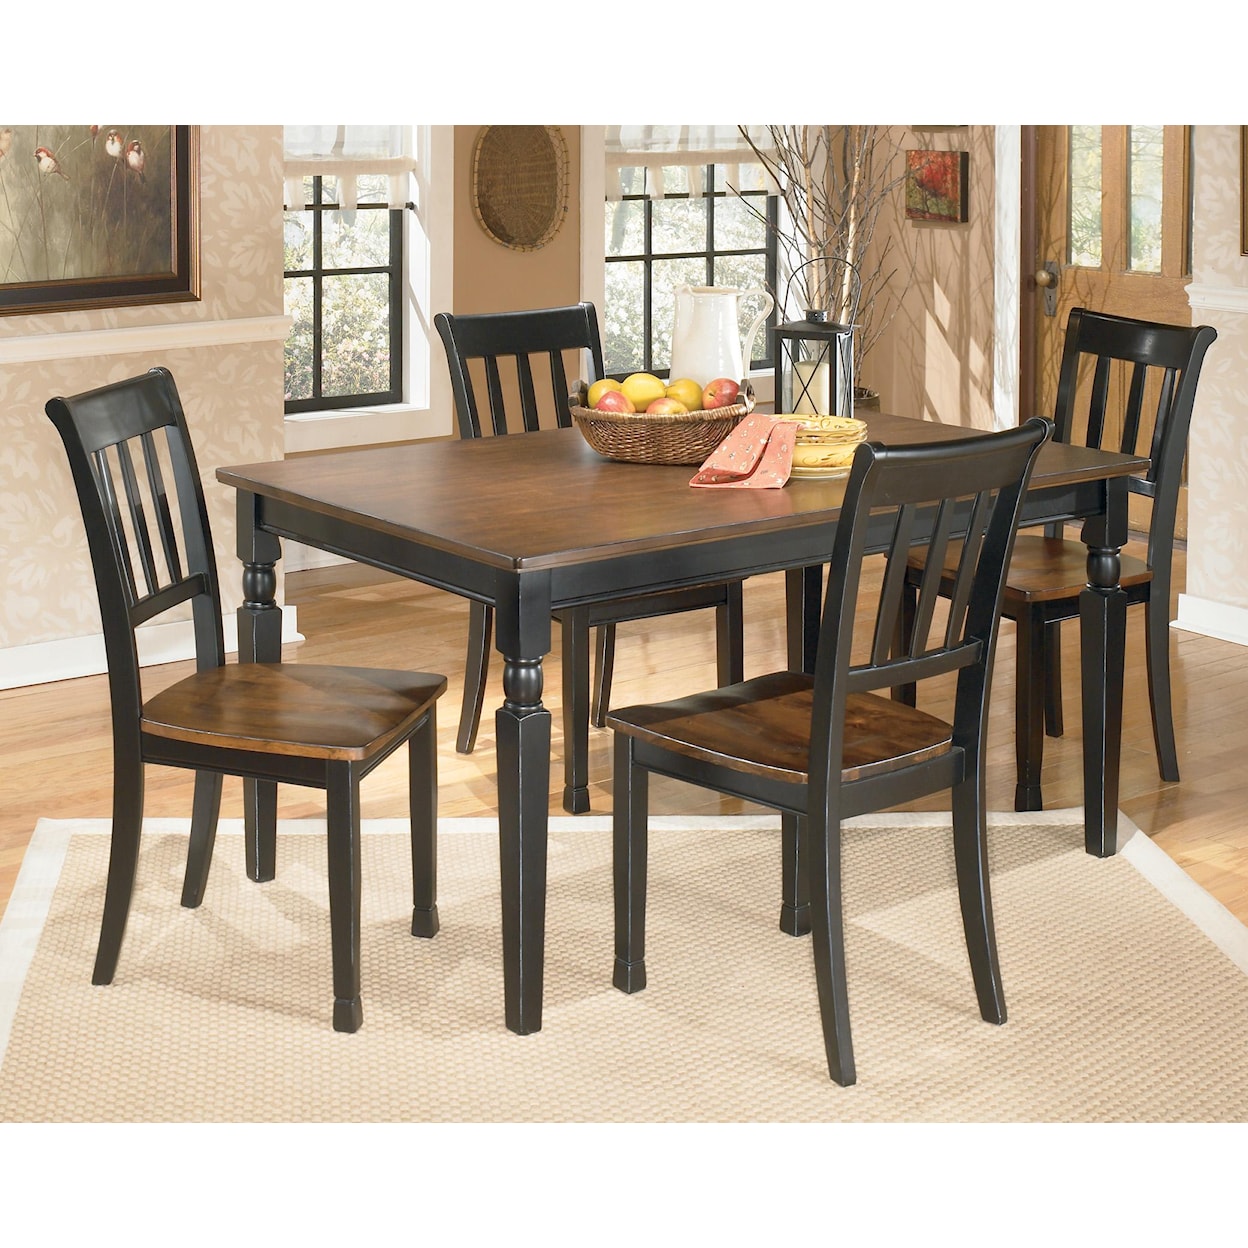 Signature Design by Ashley Owingsville 5-Piece Rectangular Dining Table Set